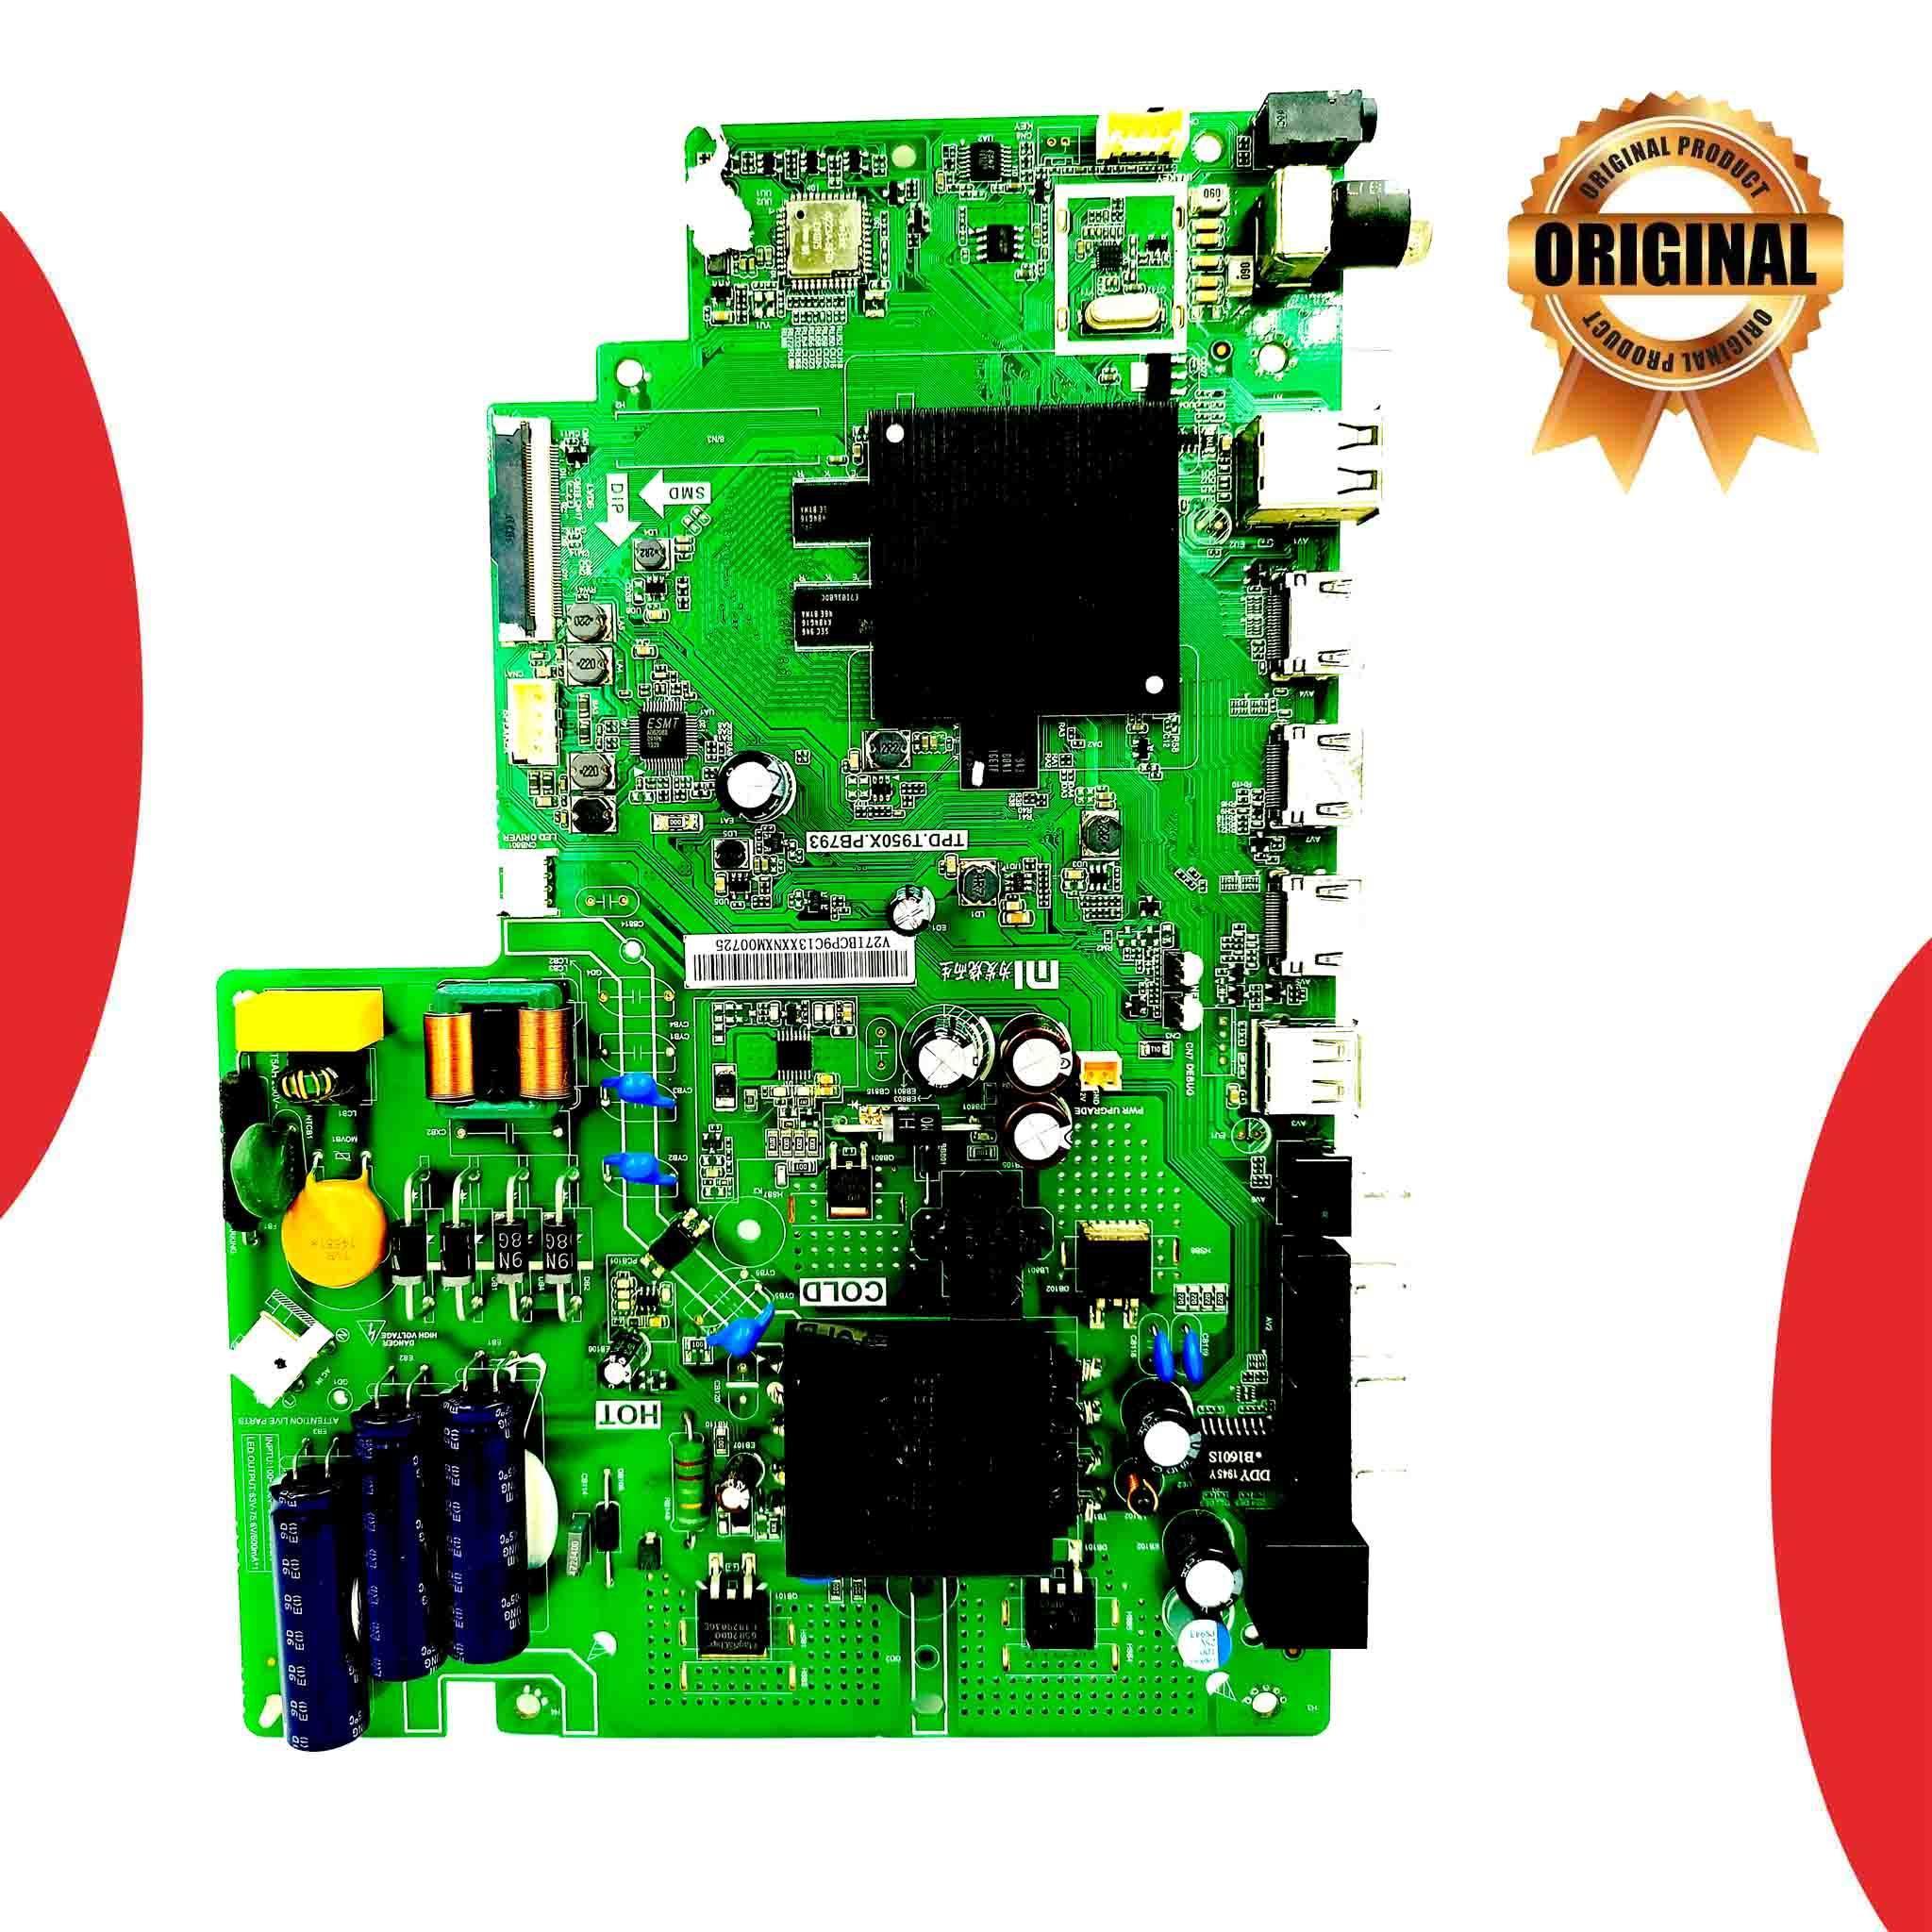 Mi 43 inch LED TV Motherboard for Model L43M5-AN - Great Bharat Electronics